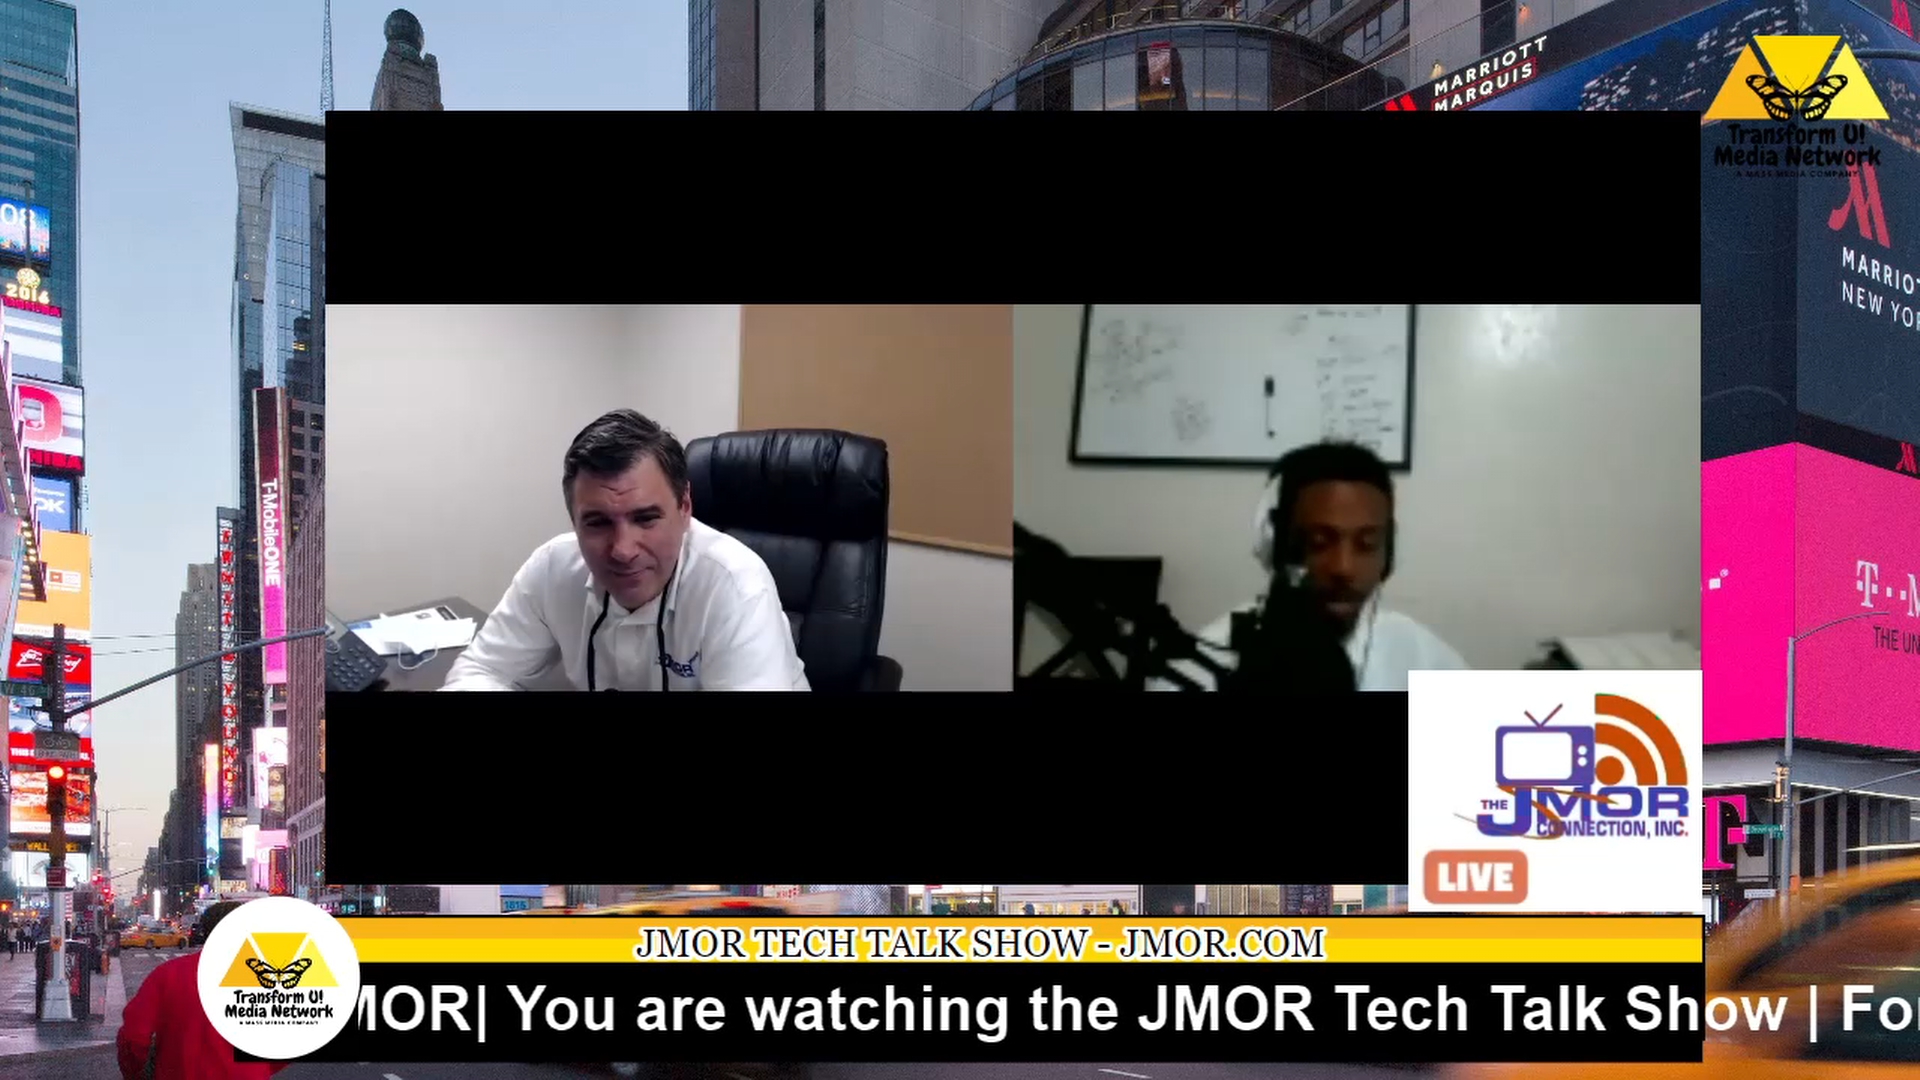 JMOR Tech Talk Show 2020E11:  Amazon and Drone Deliverys, Schools Reopening, Tesla Self Driving Cars and More...